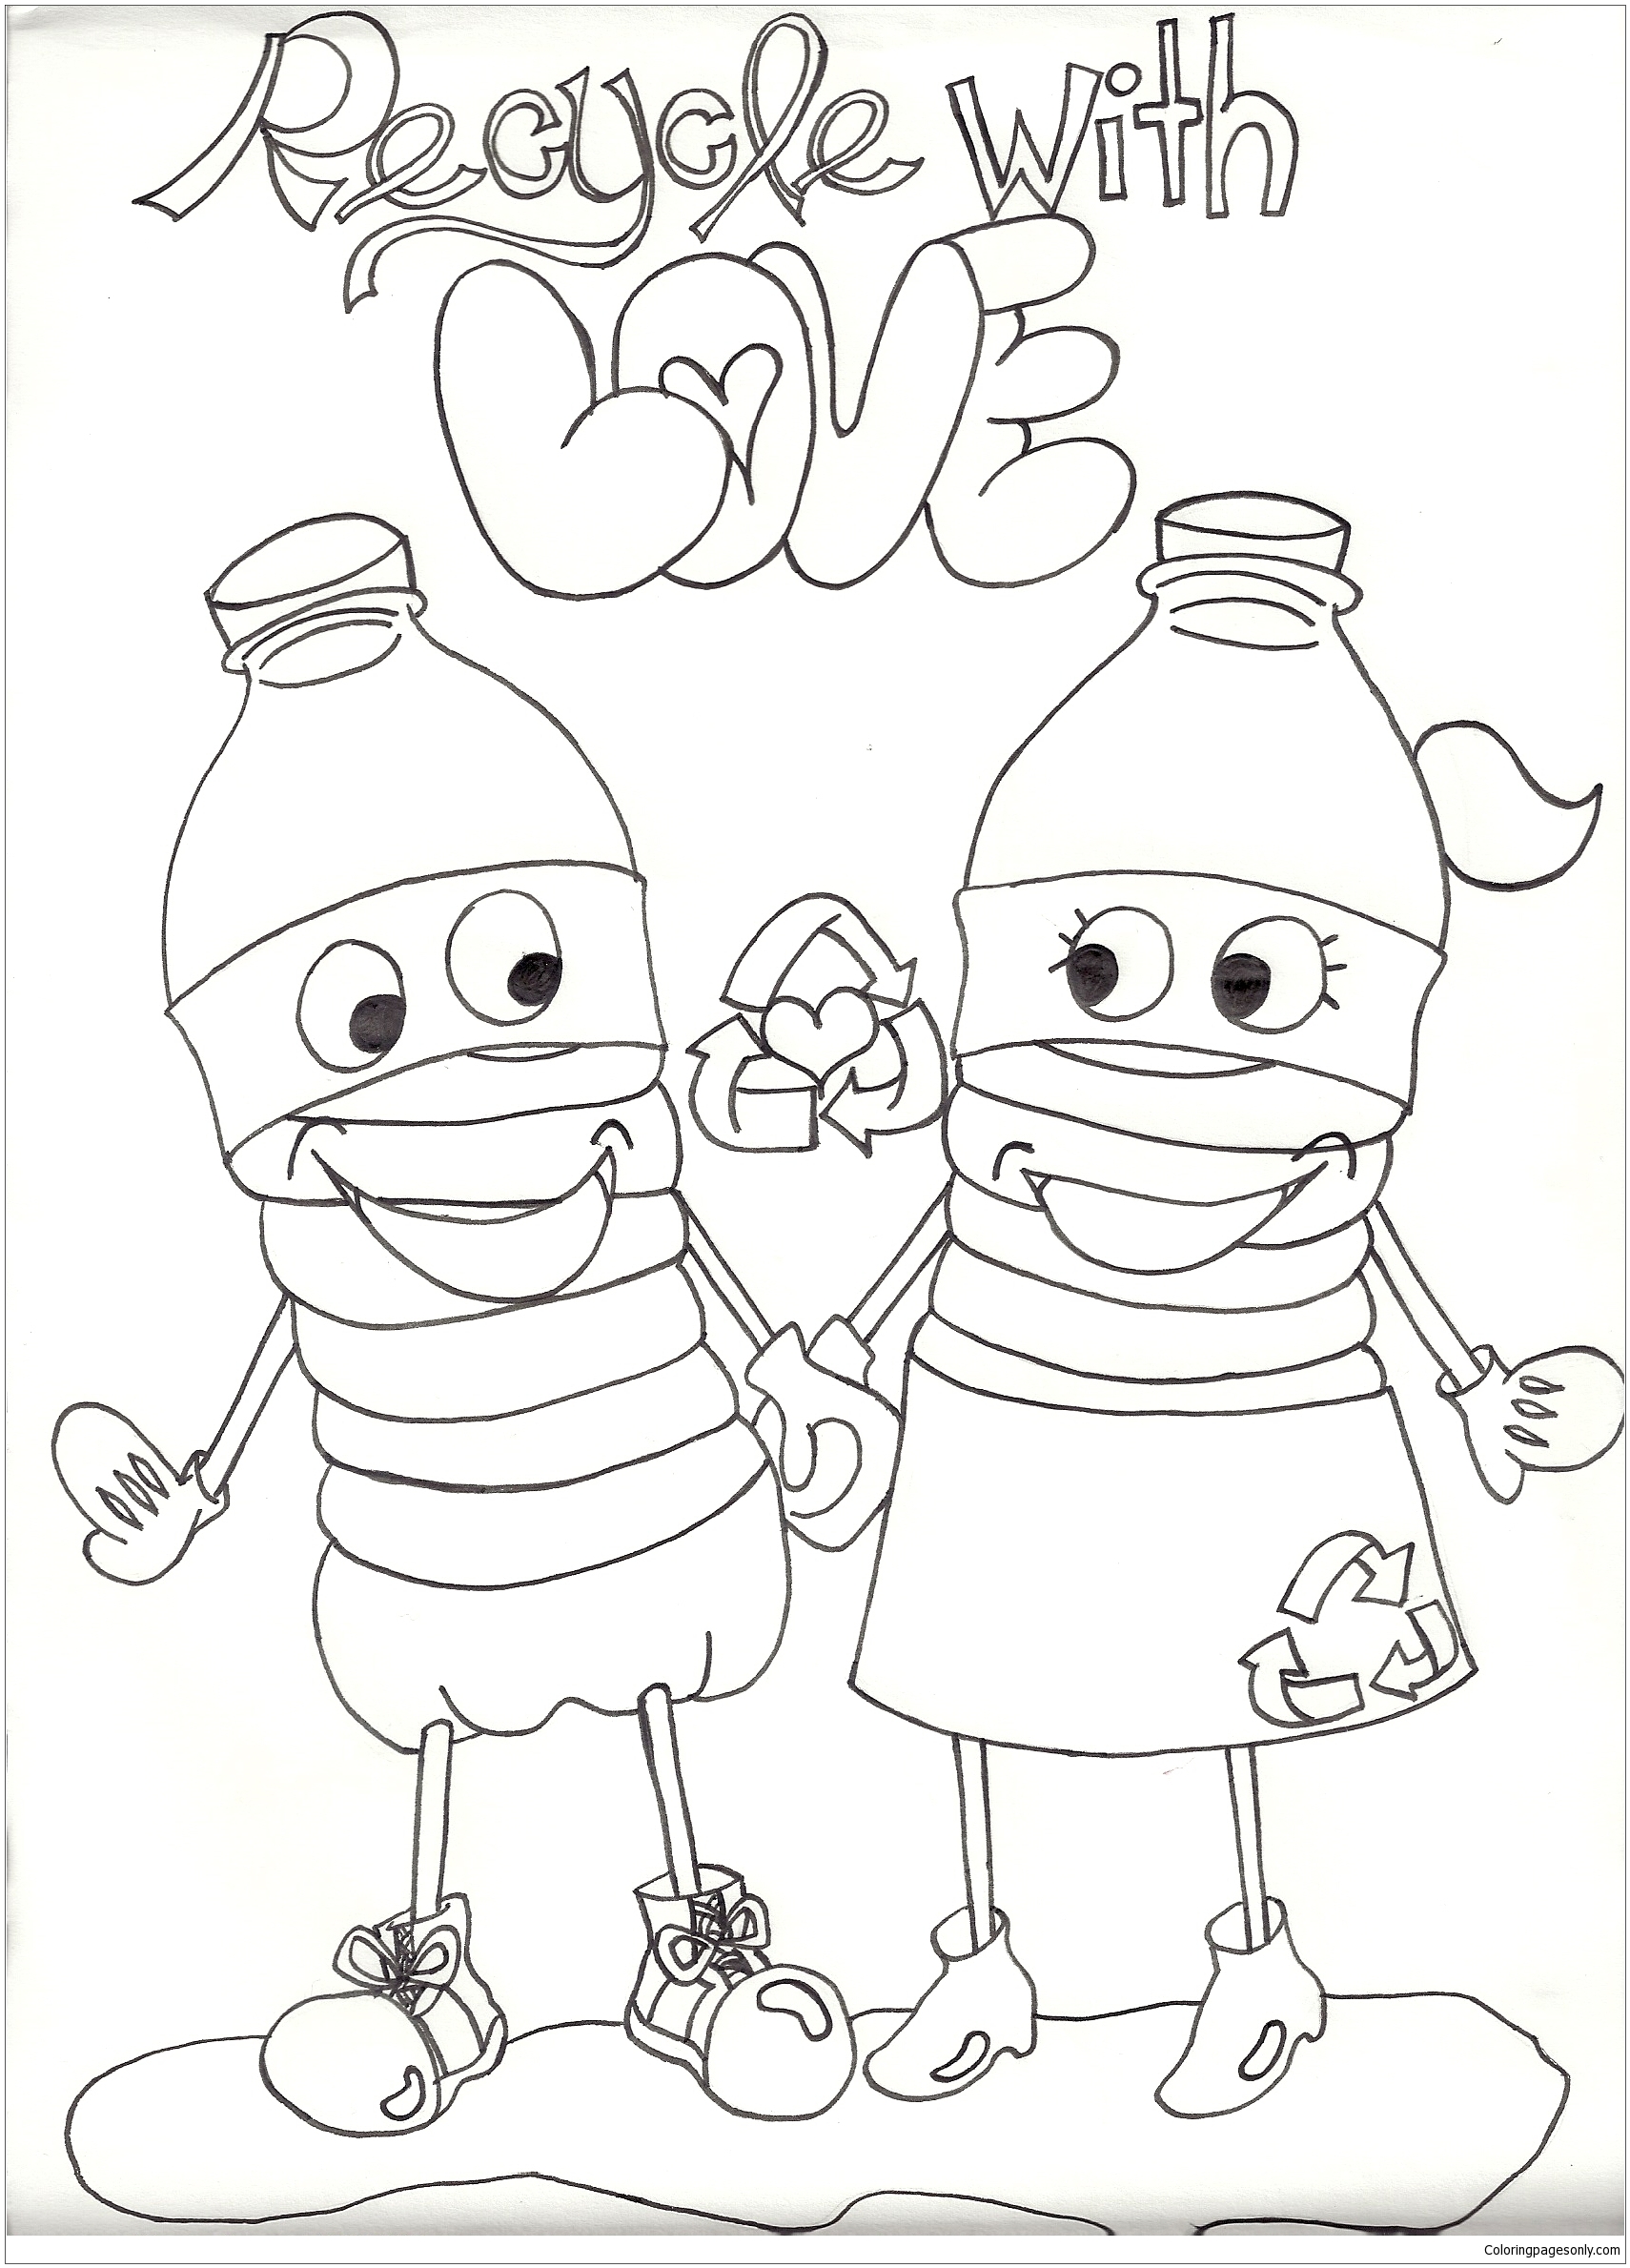 Recycle Wth Love Coloring Pages